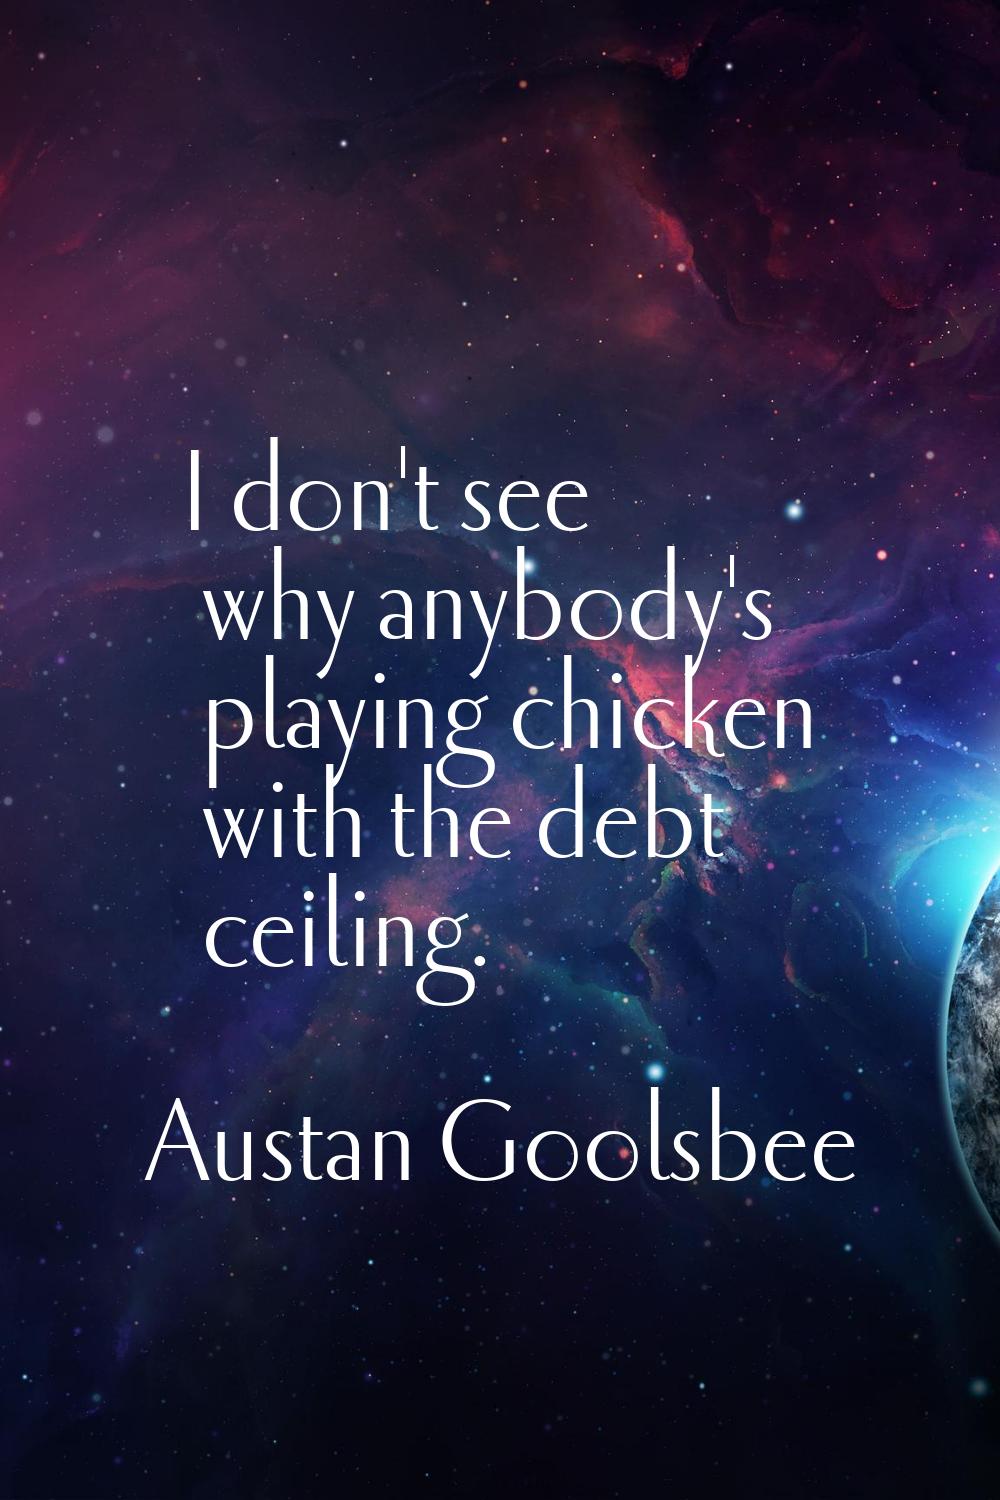 I don't see why anybody's playing chicken with the debt ceiling.